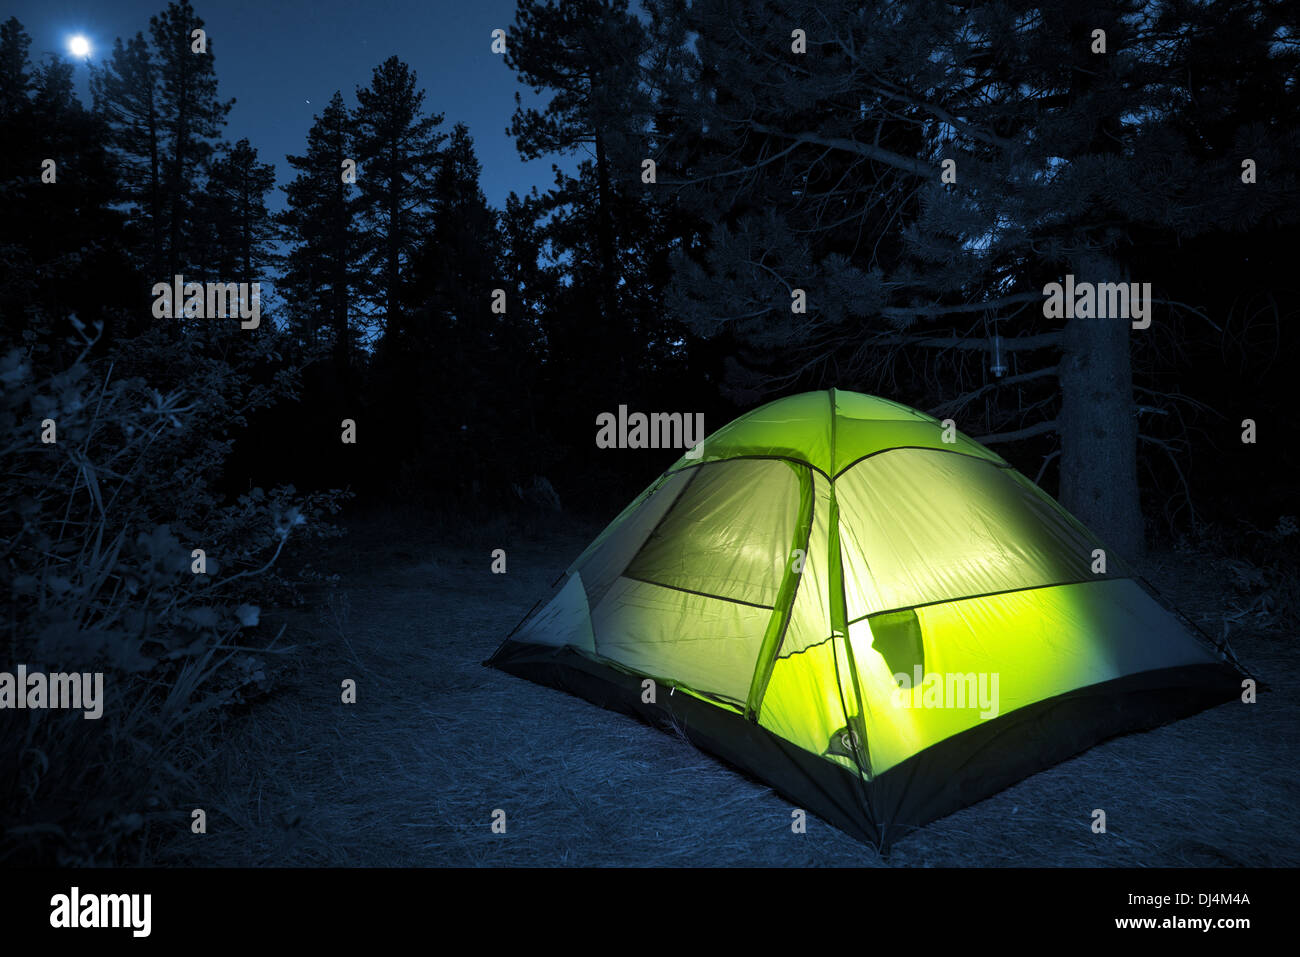 Small Camping Tent Illuminated Inside. Night Hours Campsite. Recreation and Outdoor Photo Collection. Stock Photo